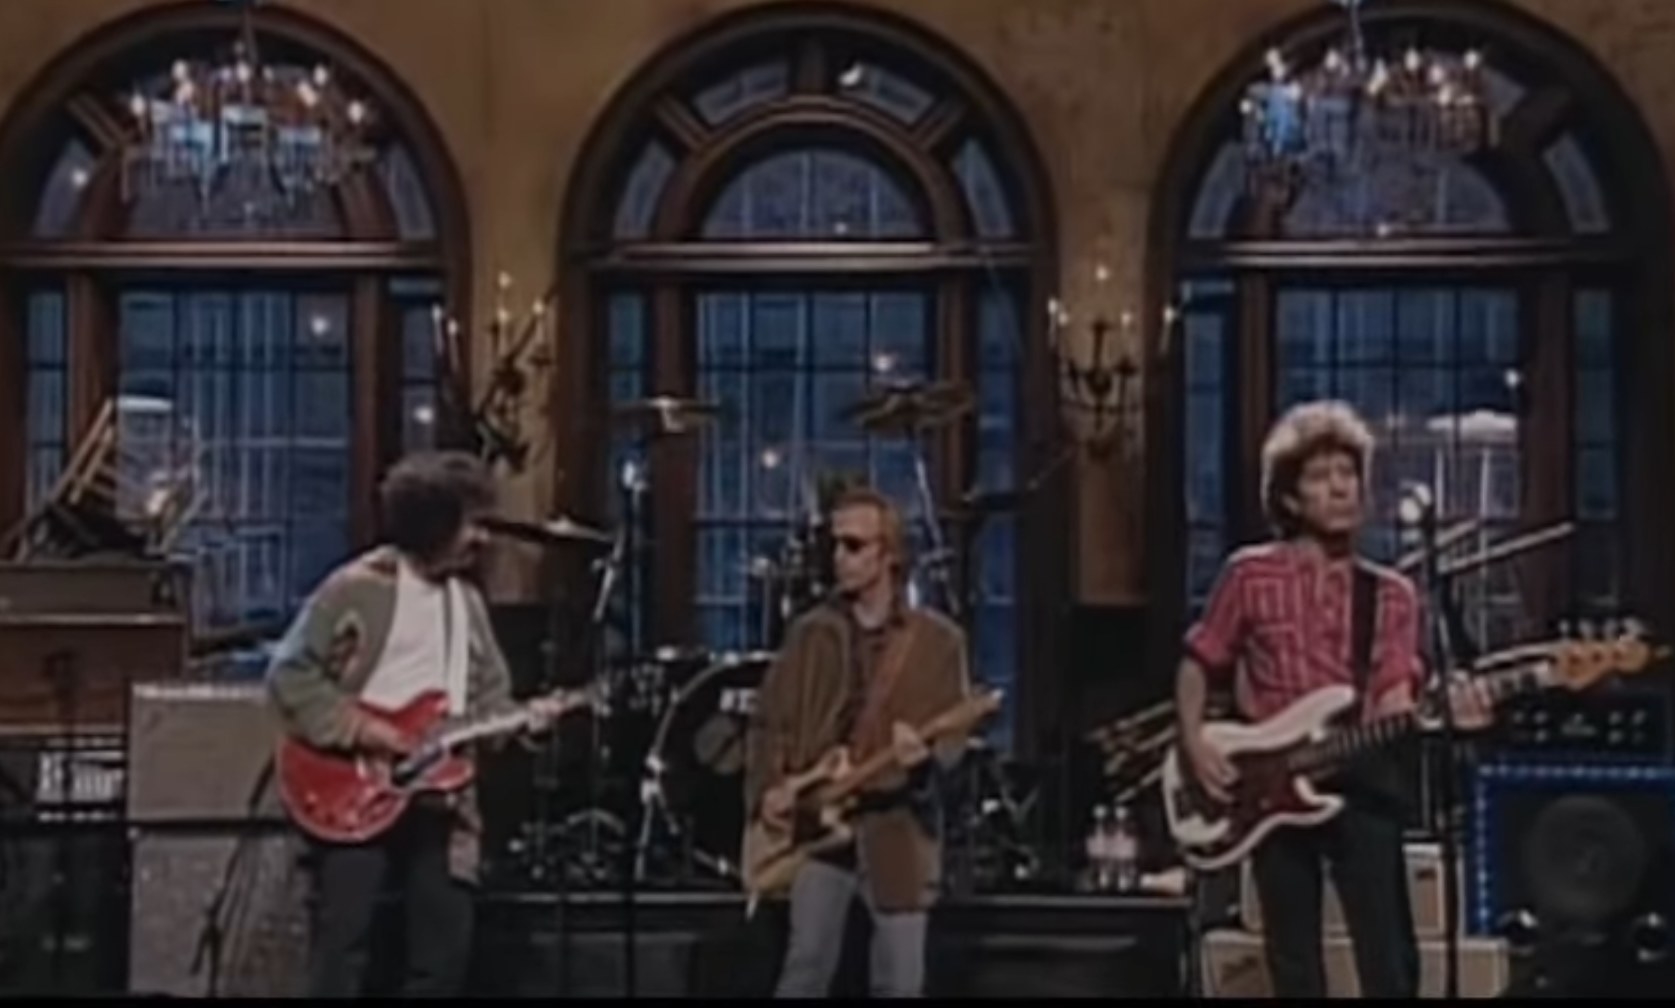 Tom Petty playing onstage at SNL with Dave Grohl on the drums